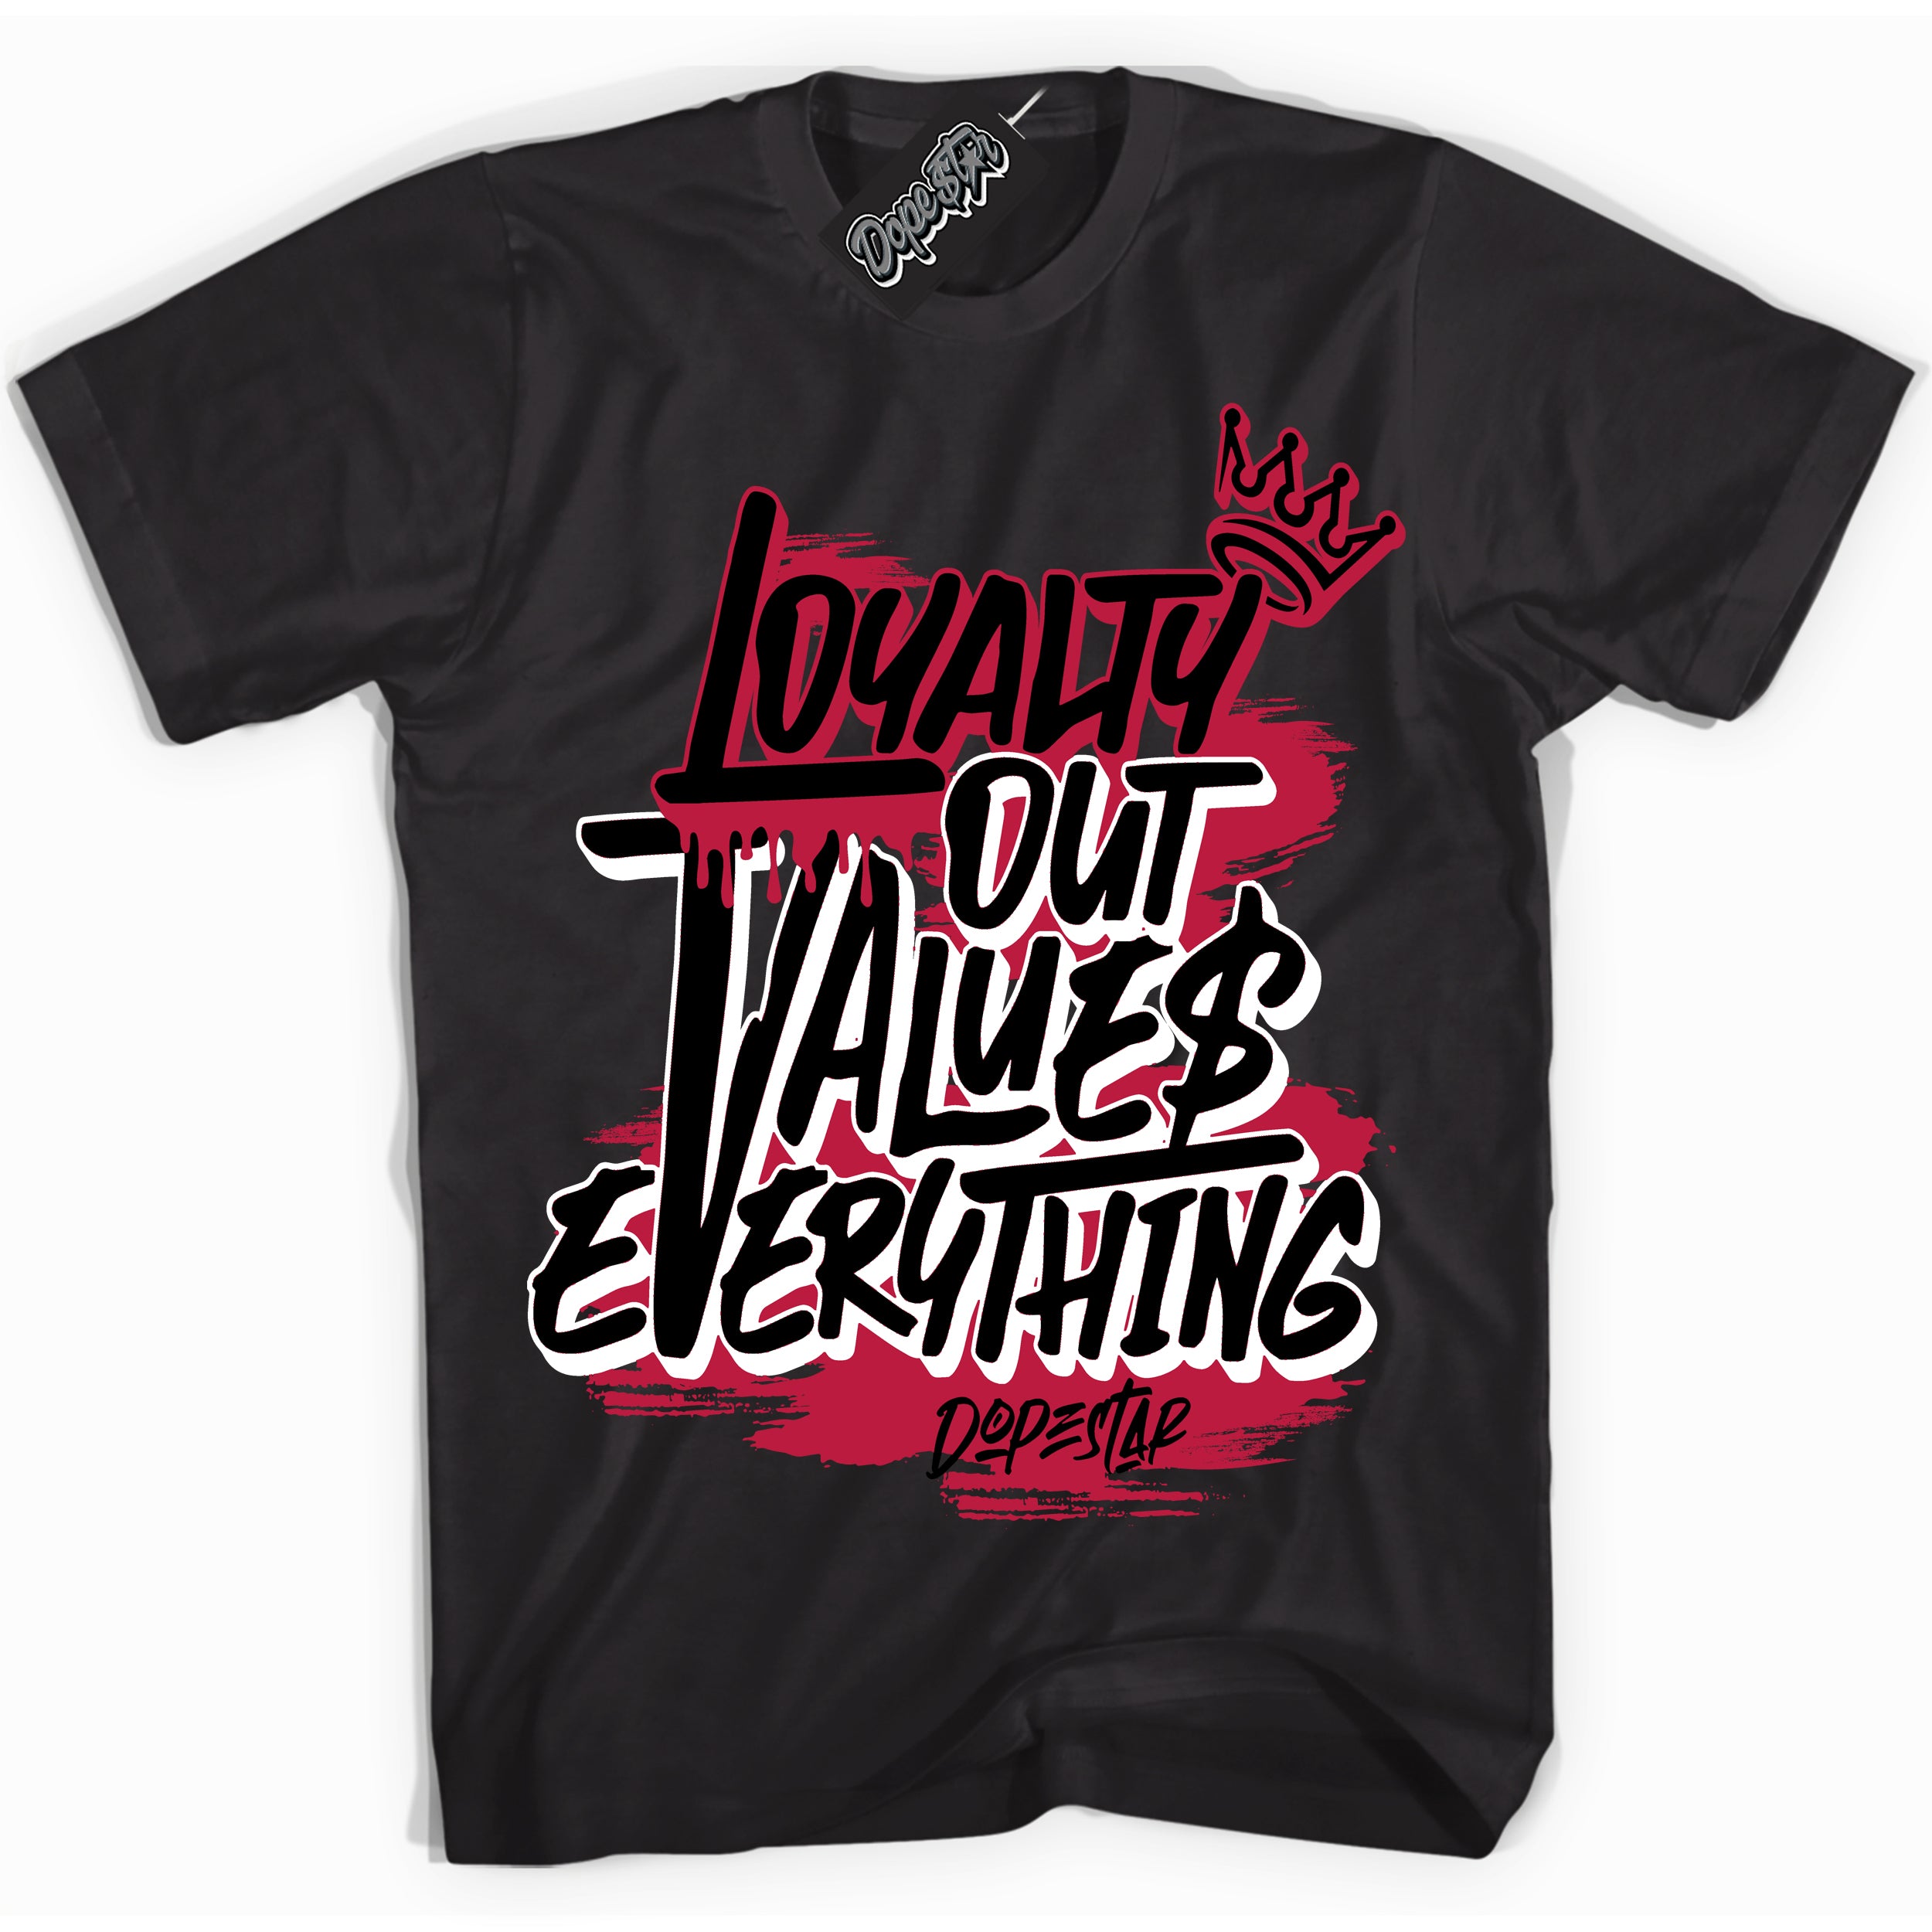 Cool Black Shirt with “ Loyalty Out Values Everything” design that perfectly matches Alternate Bred 2022 1s Sneakers.